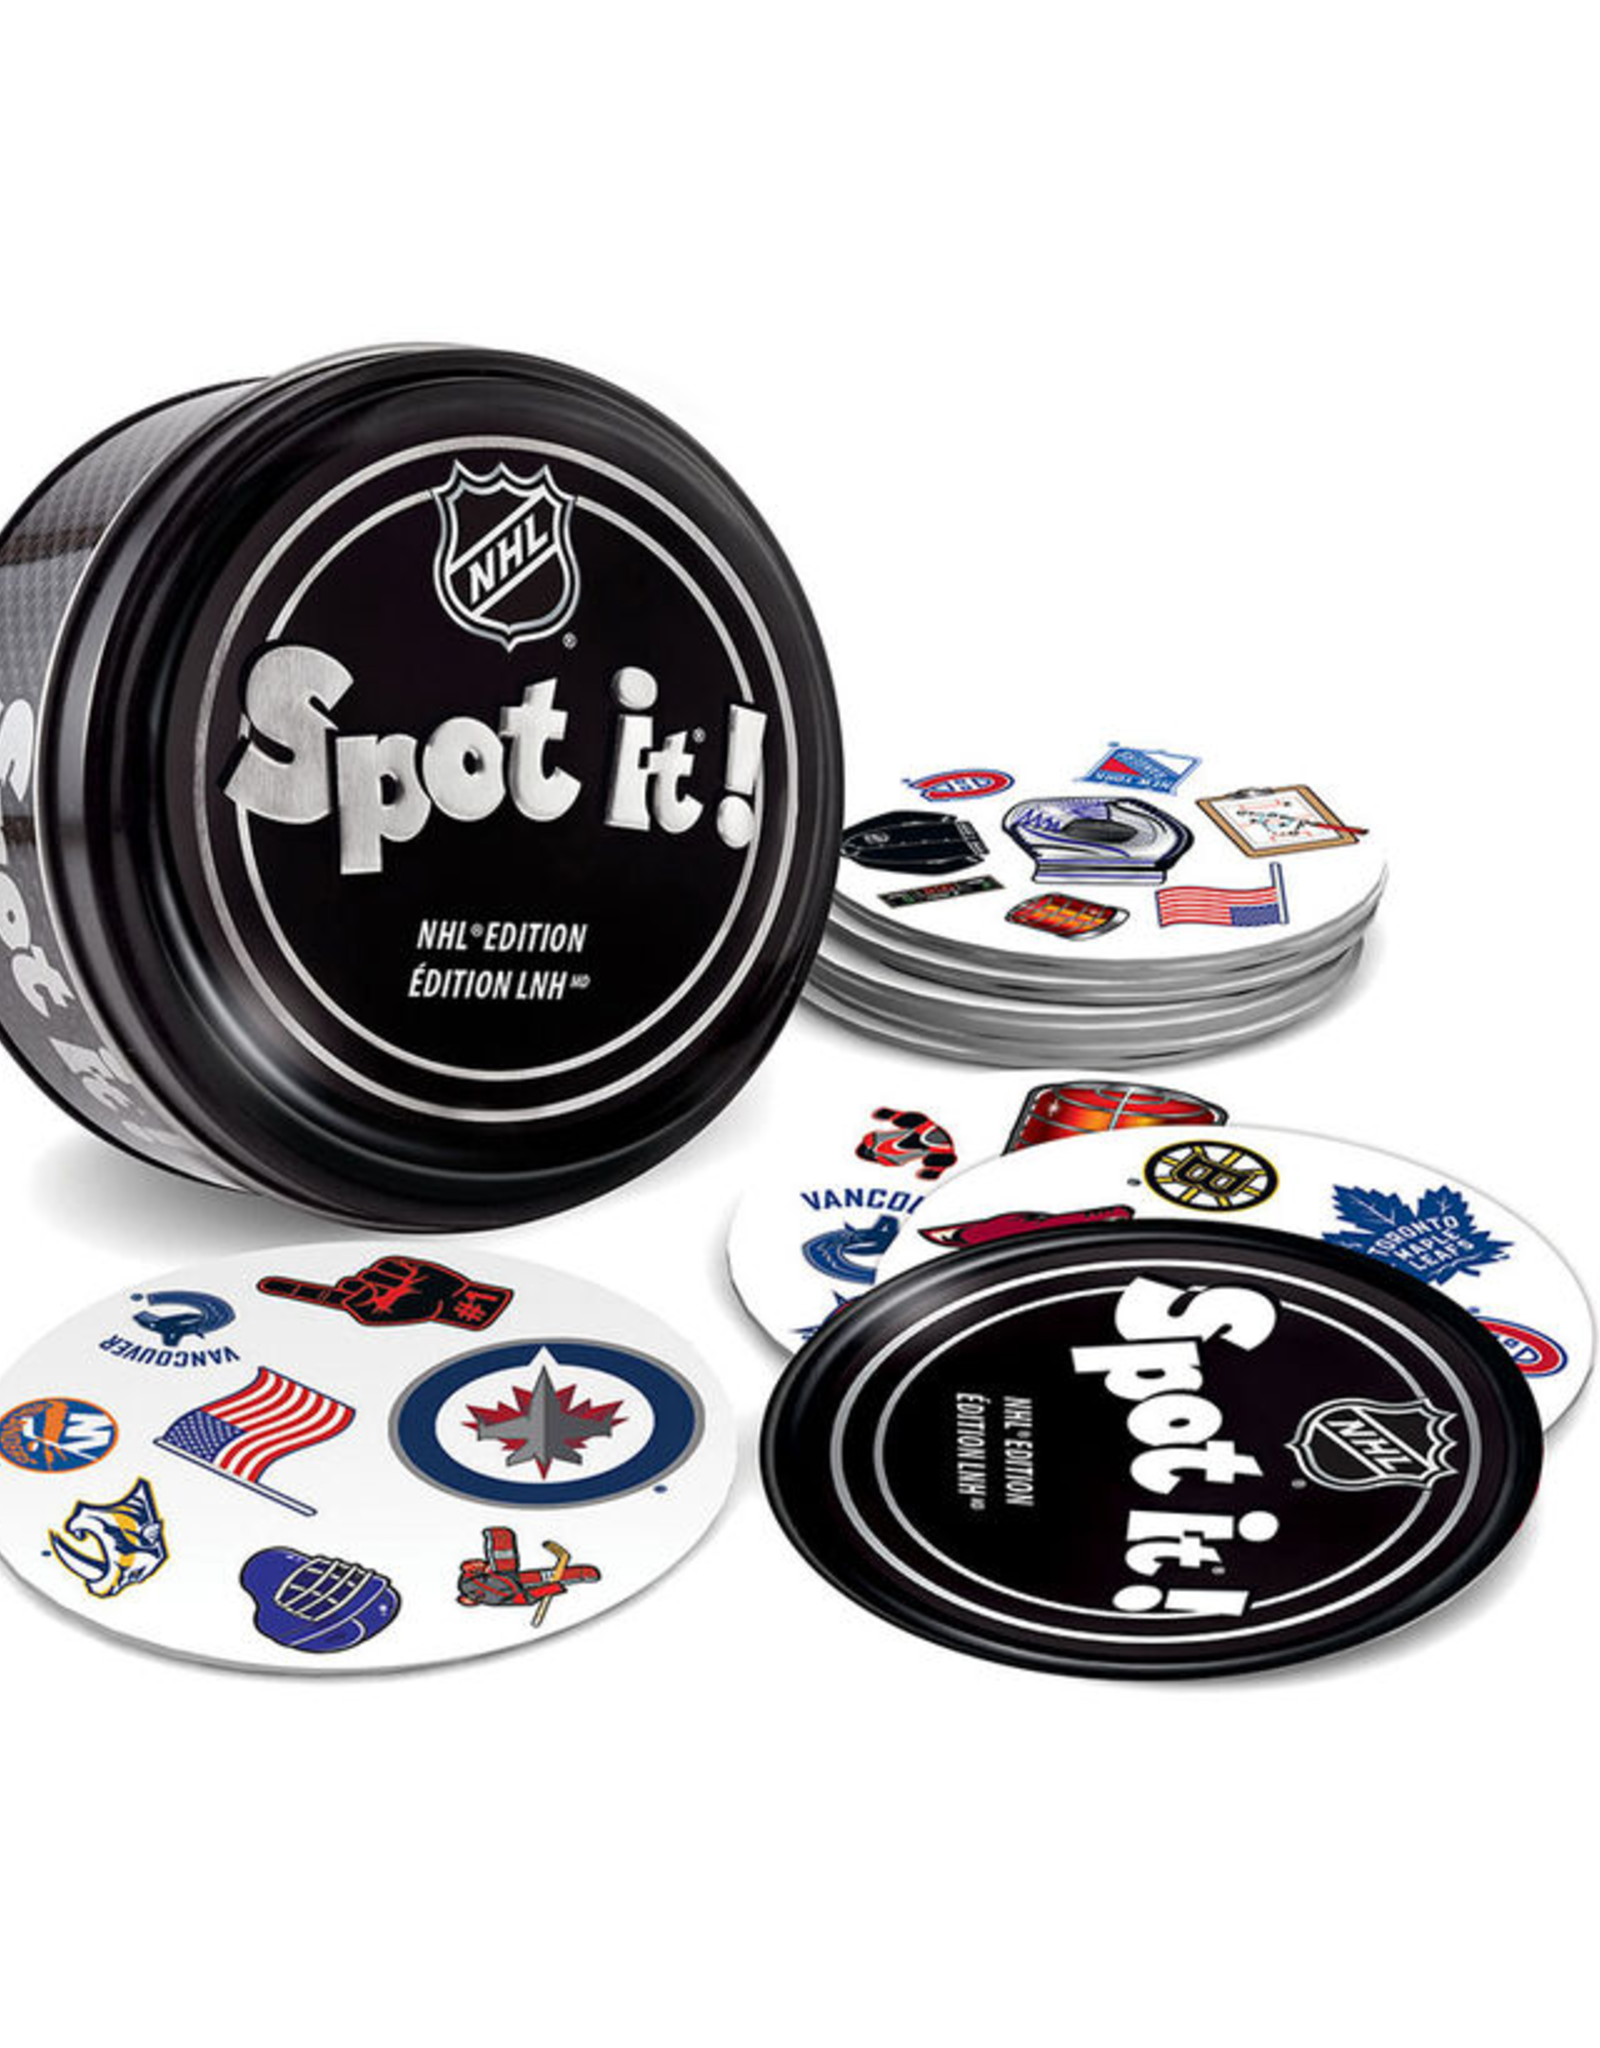 MasterPieces MasterPieces - NHL Spot It